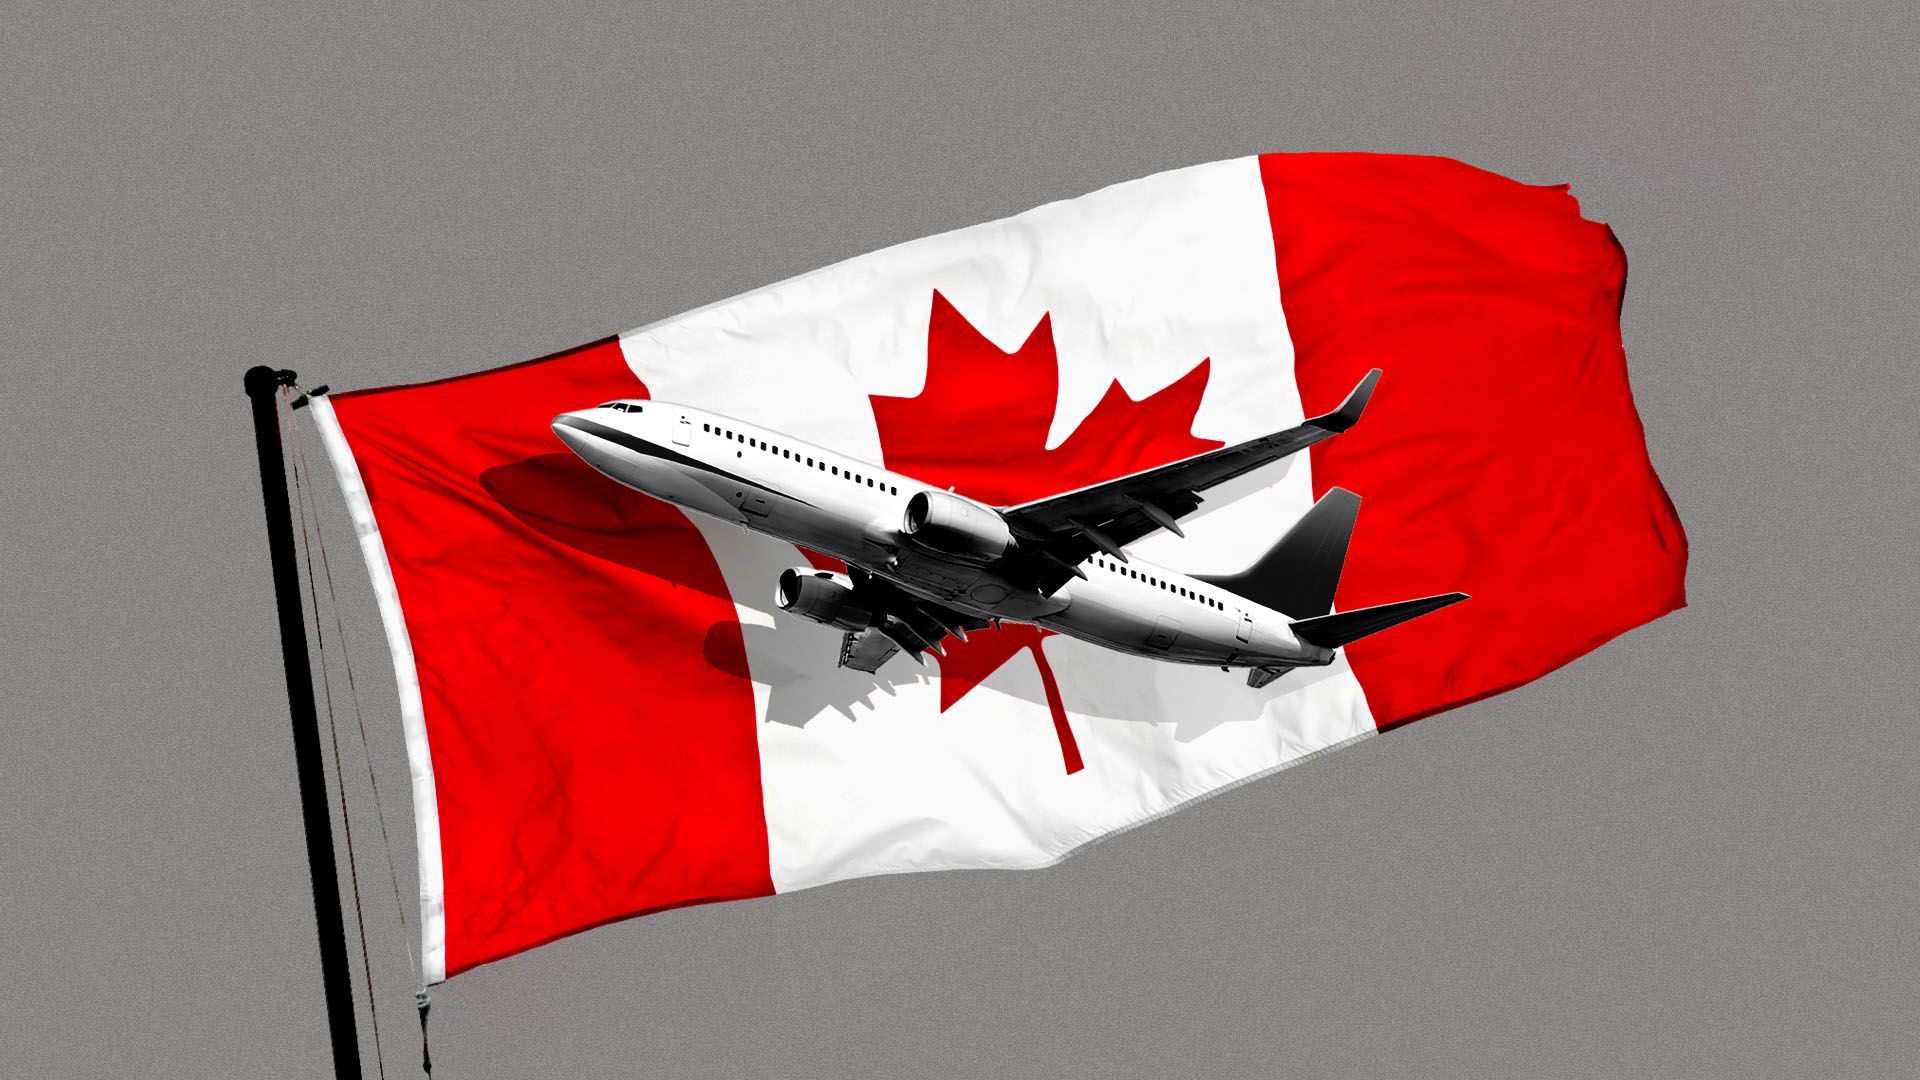 Illustration of an airplane in front of the Canadian flag